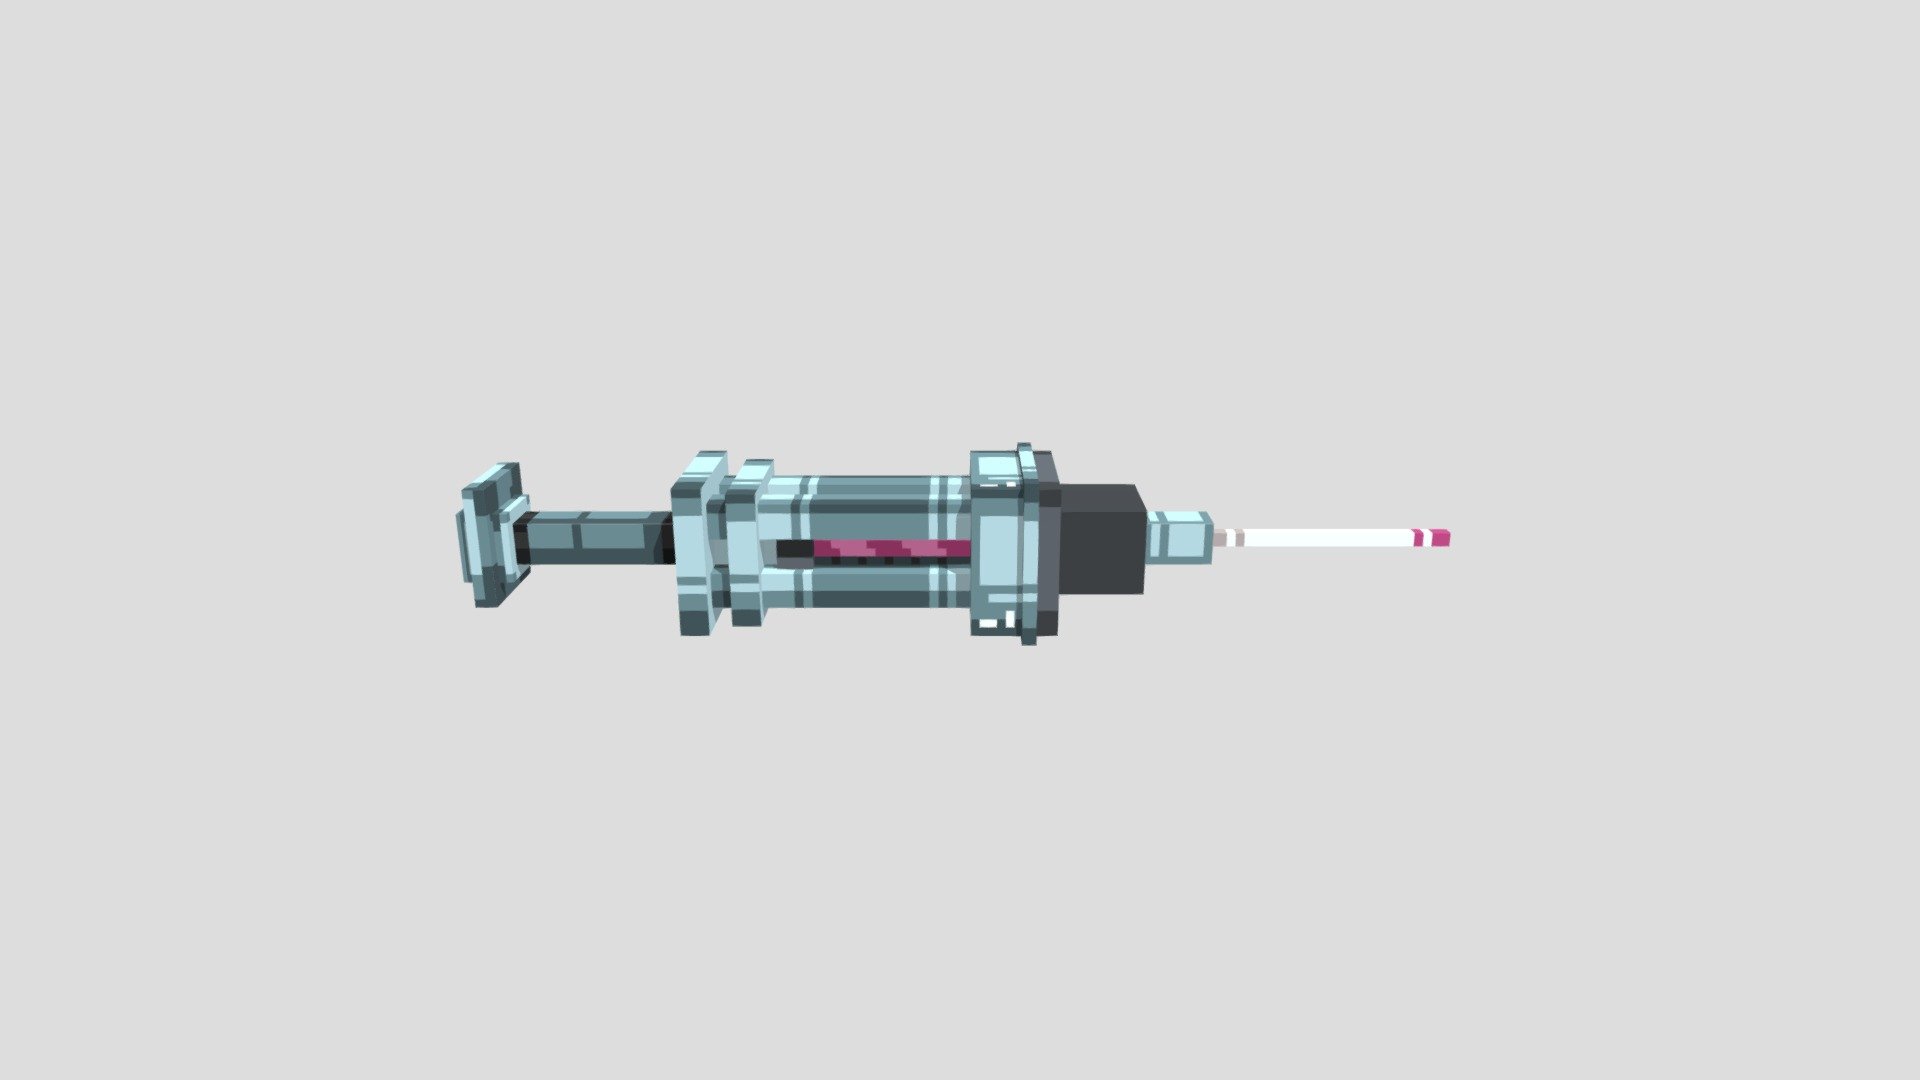 Prototype-Vaccine+ - 3D model by Became (@ed63533880) 3d model